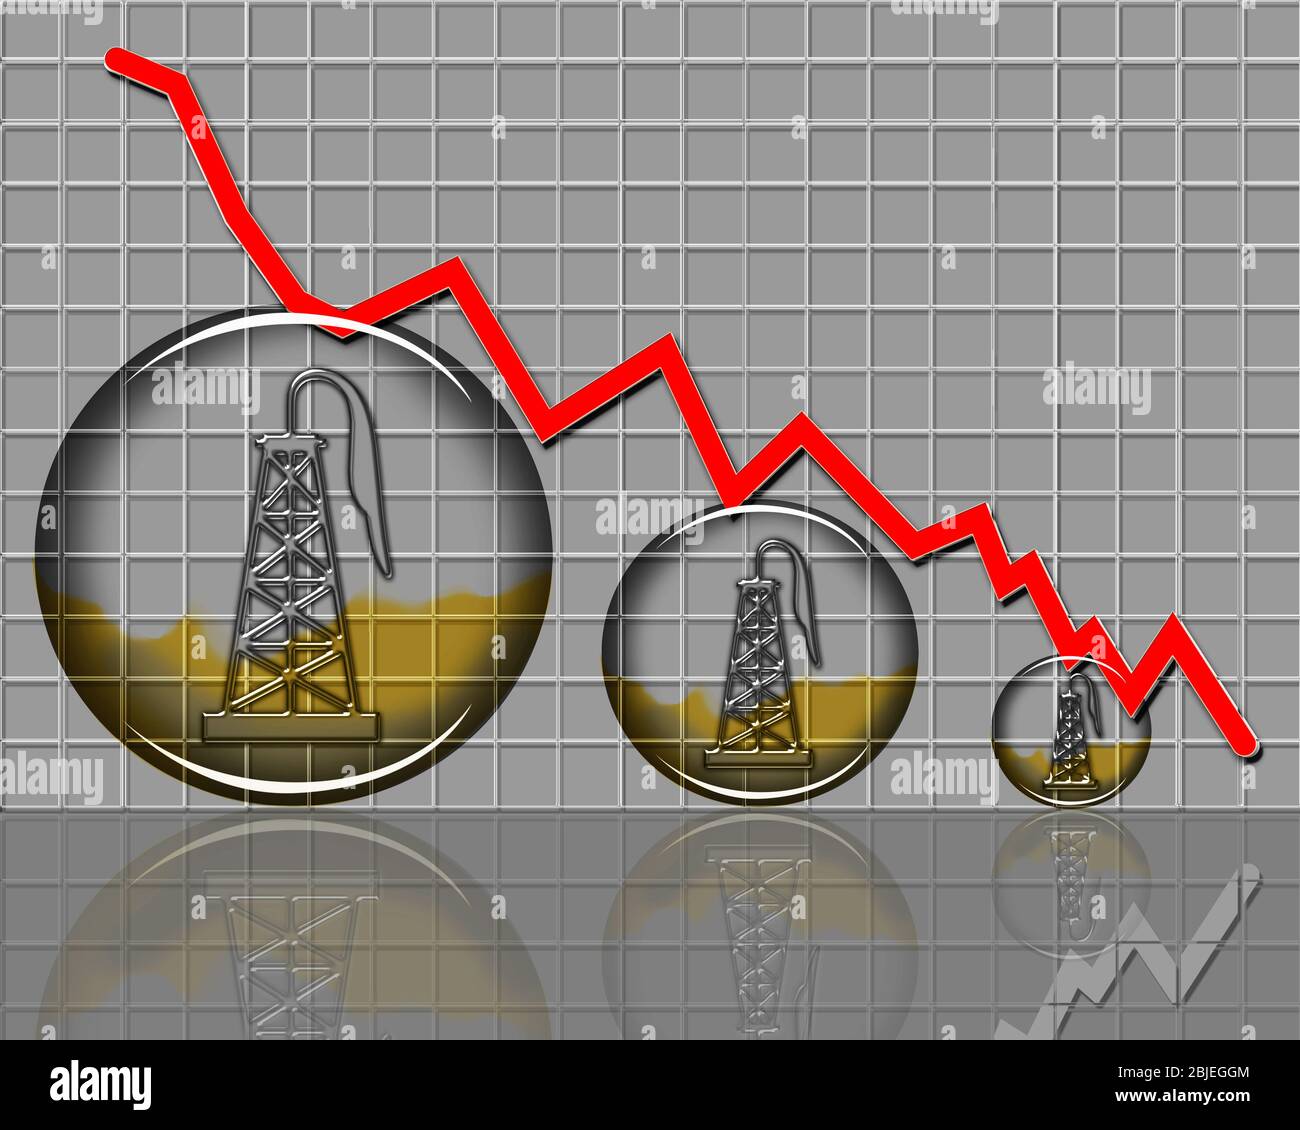 Barrel of oil prices dropping in crisis chart. Stock Photo